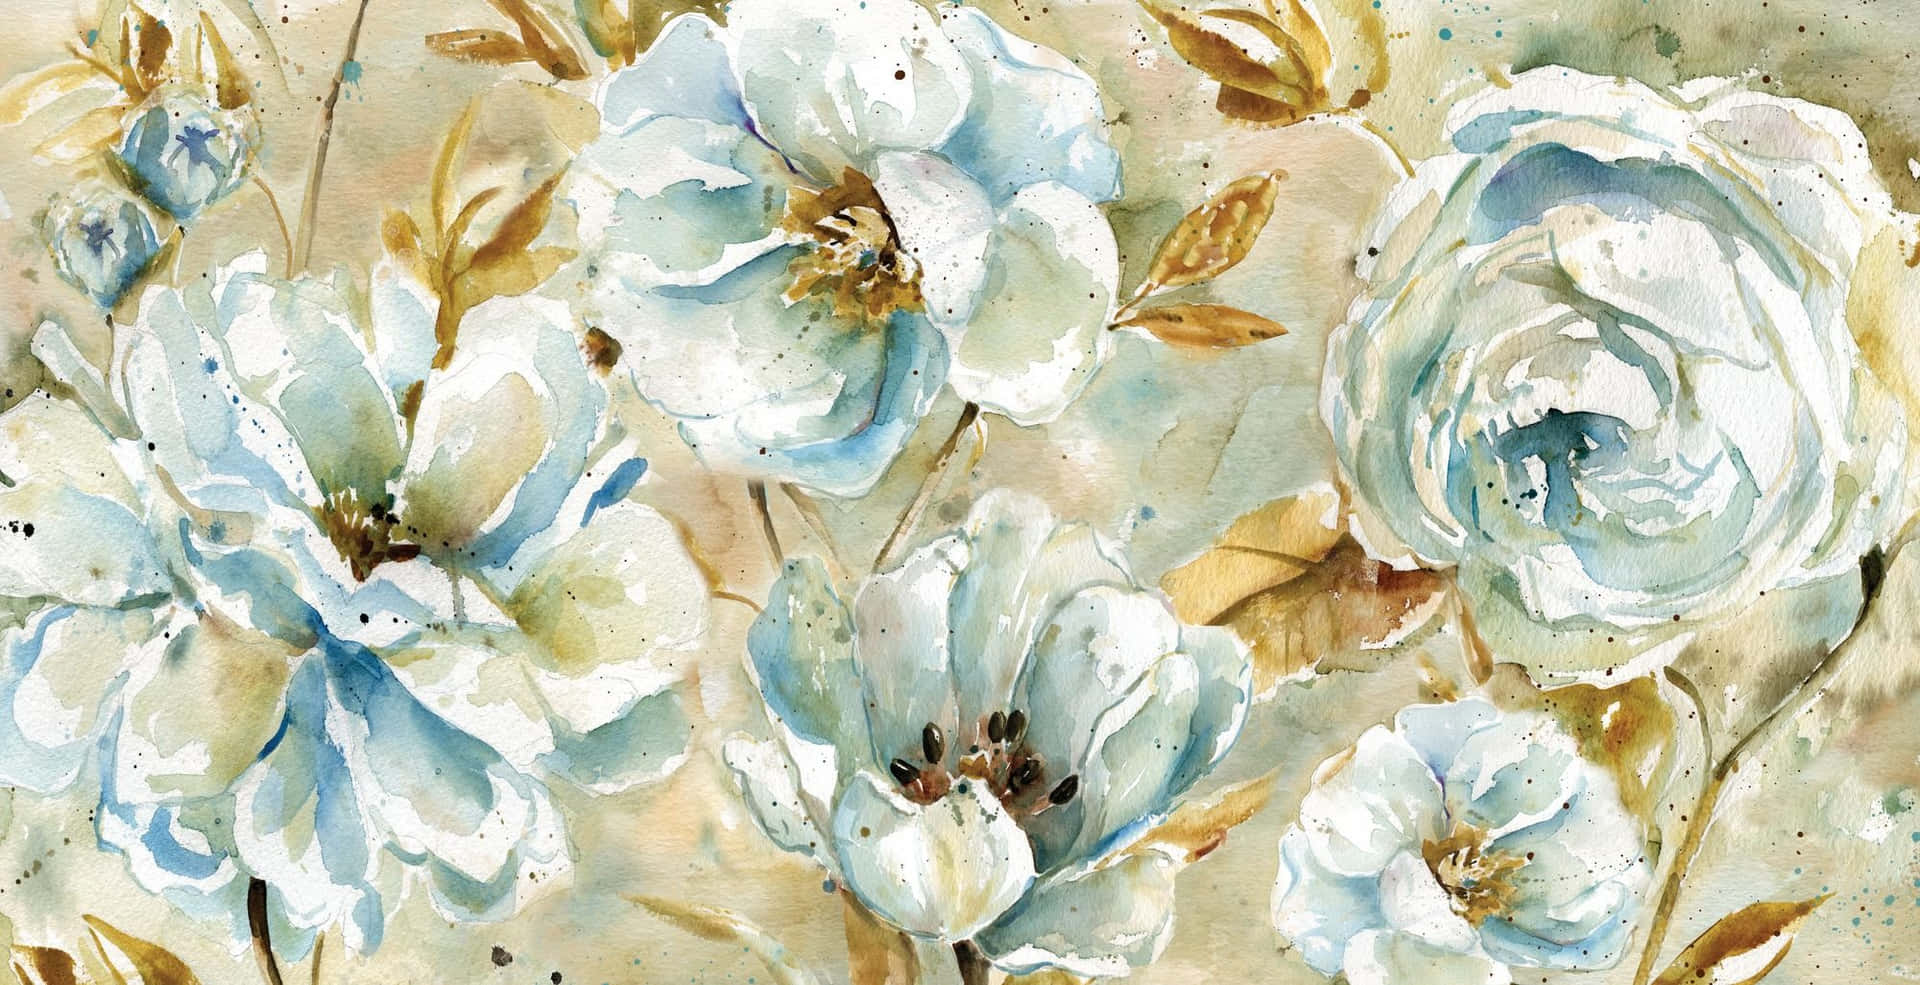 Aesthetic Floral Background